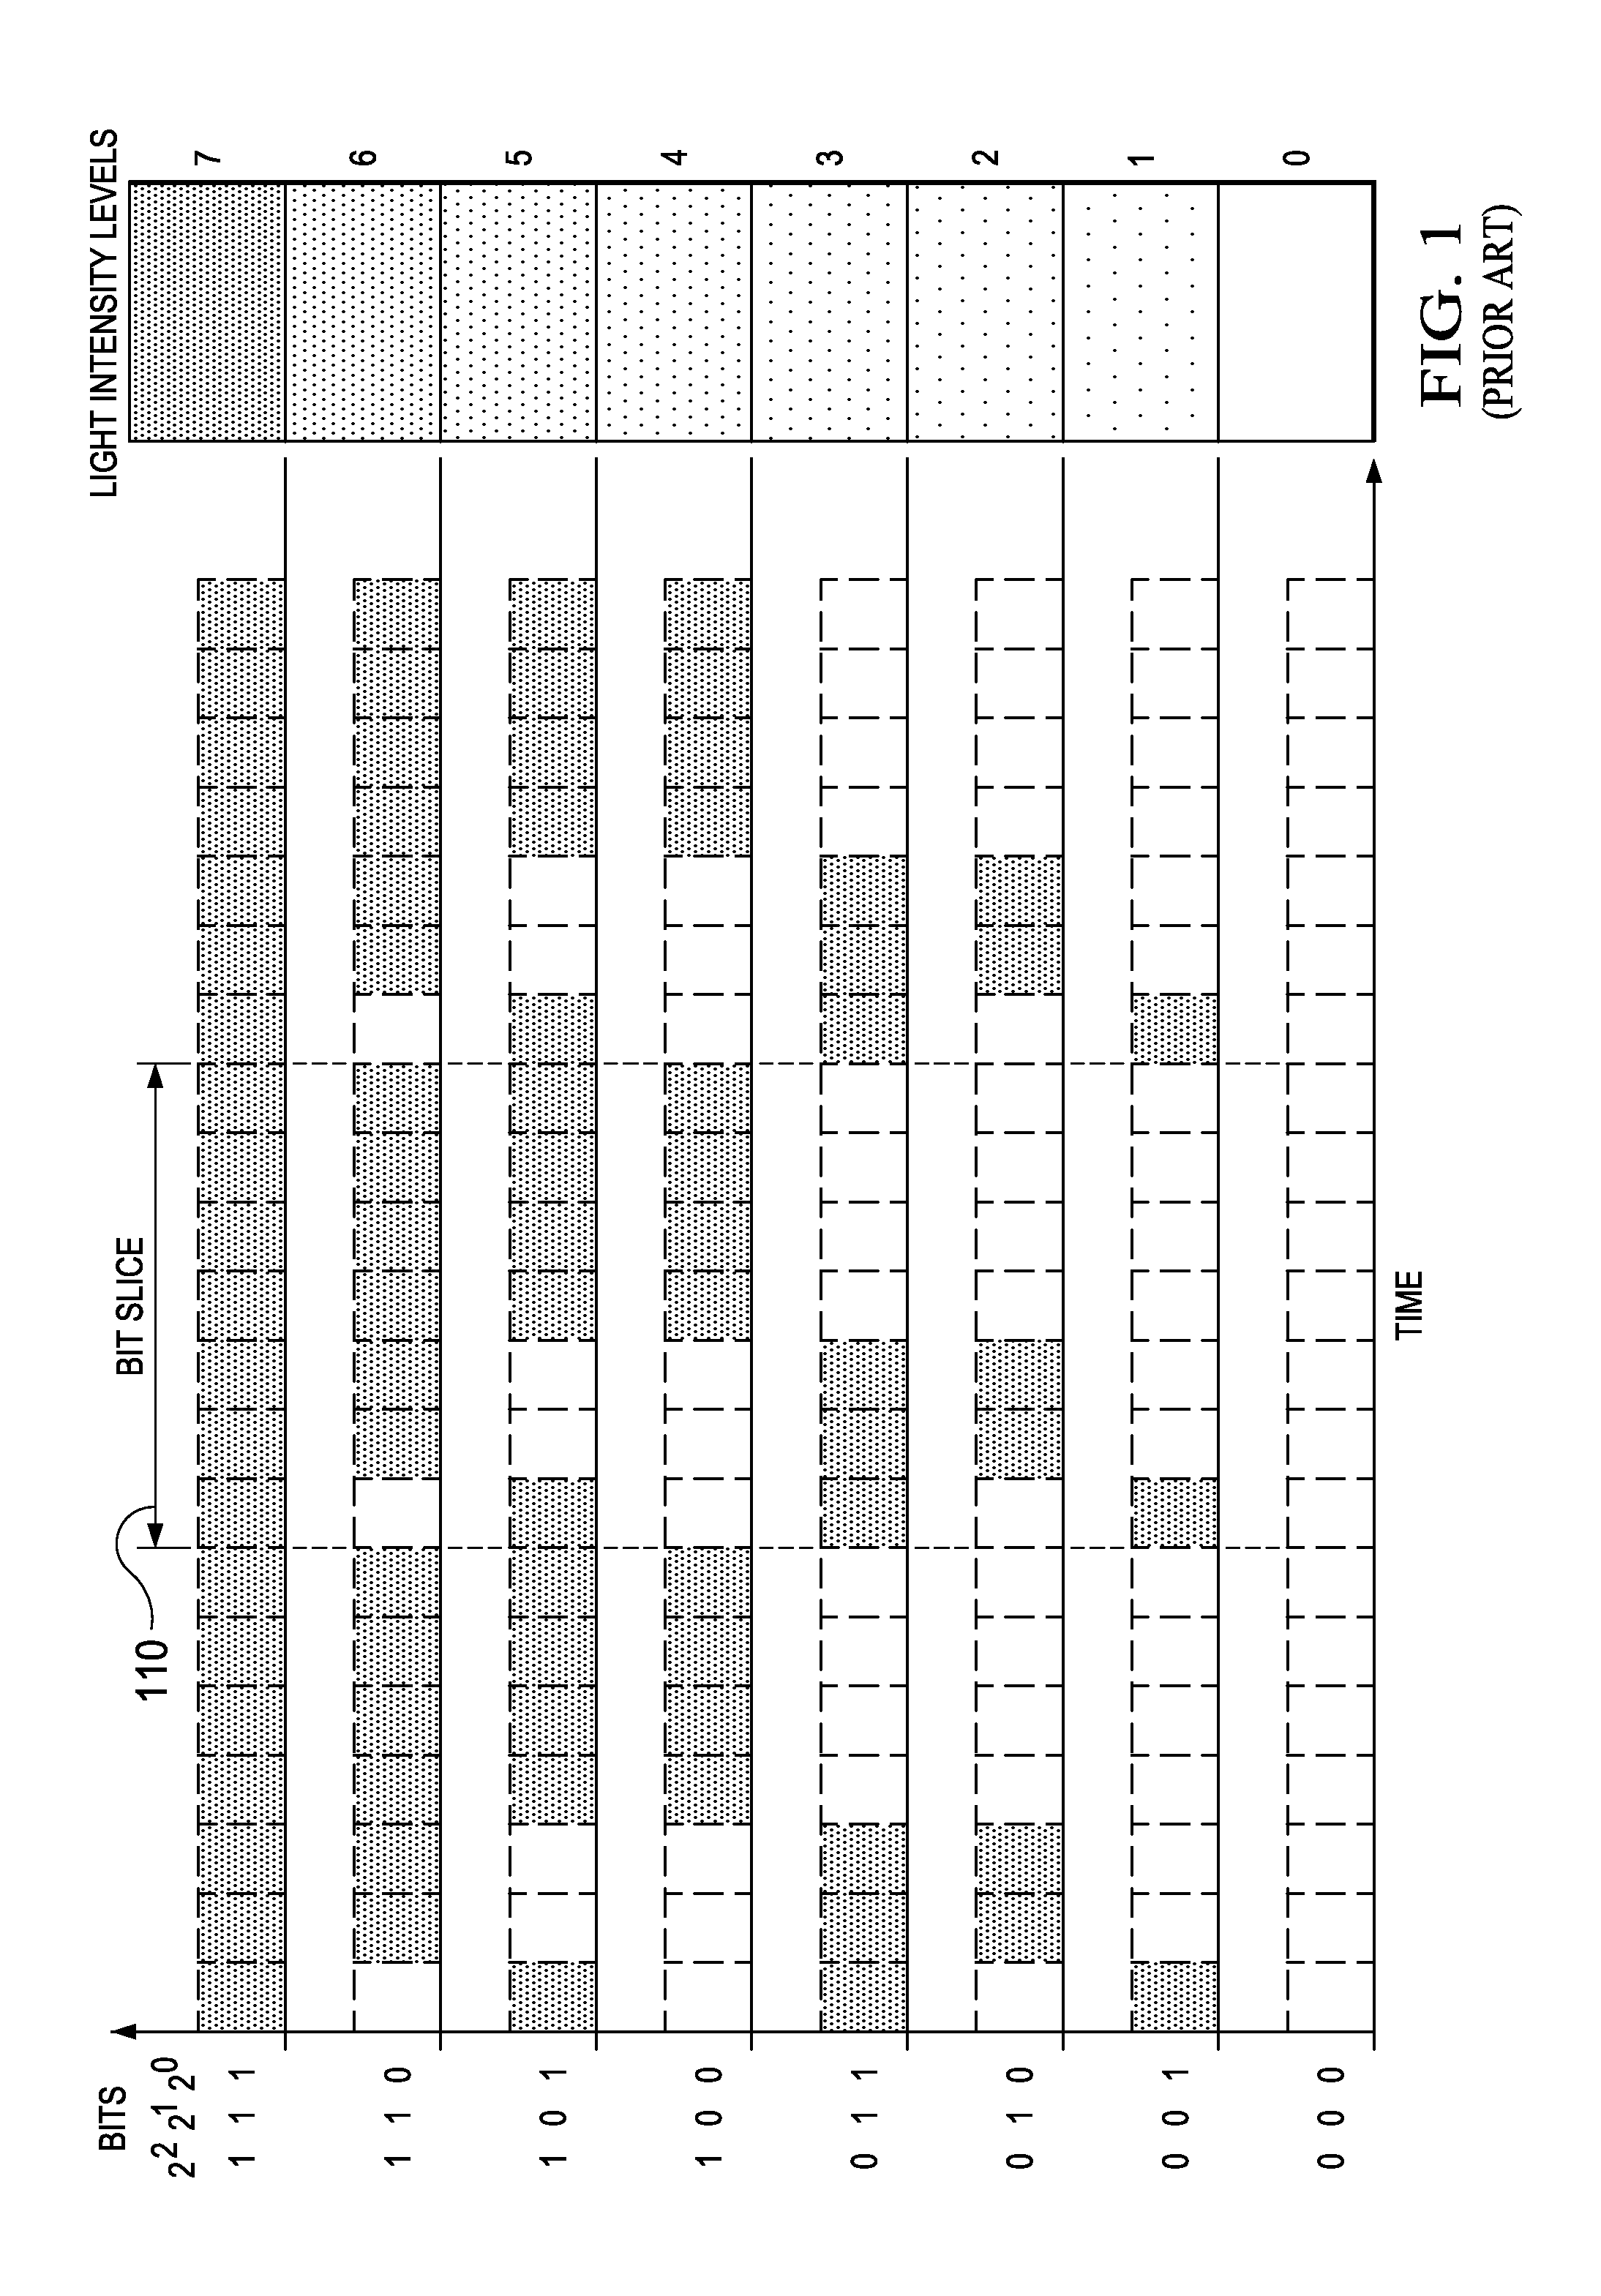 LED drive apparatus, systems and methods